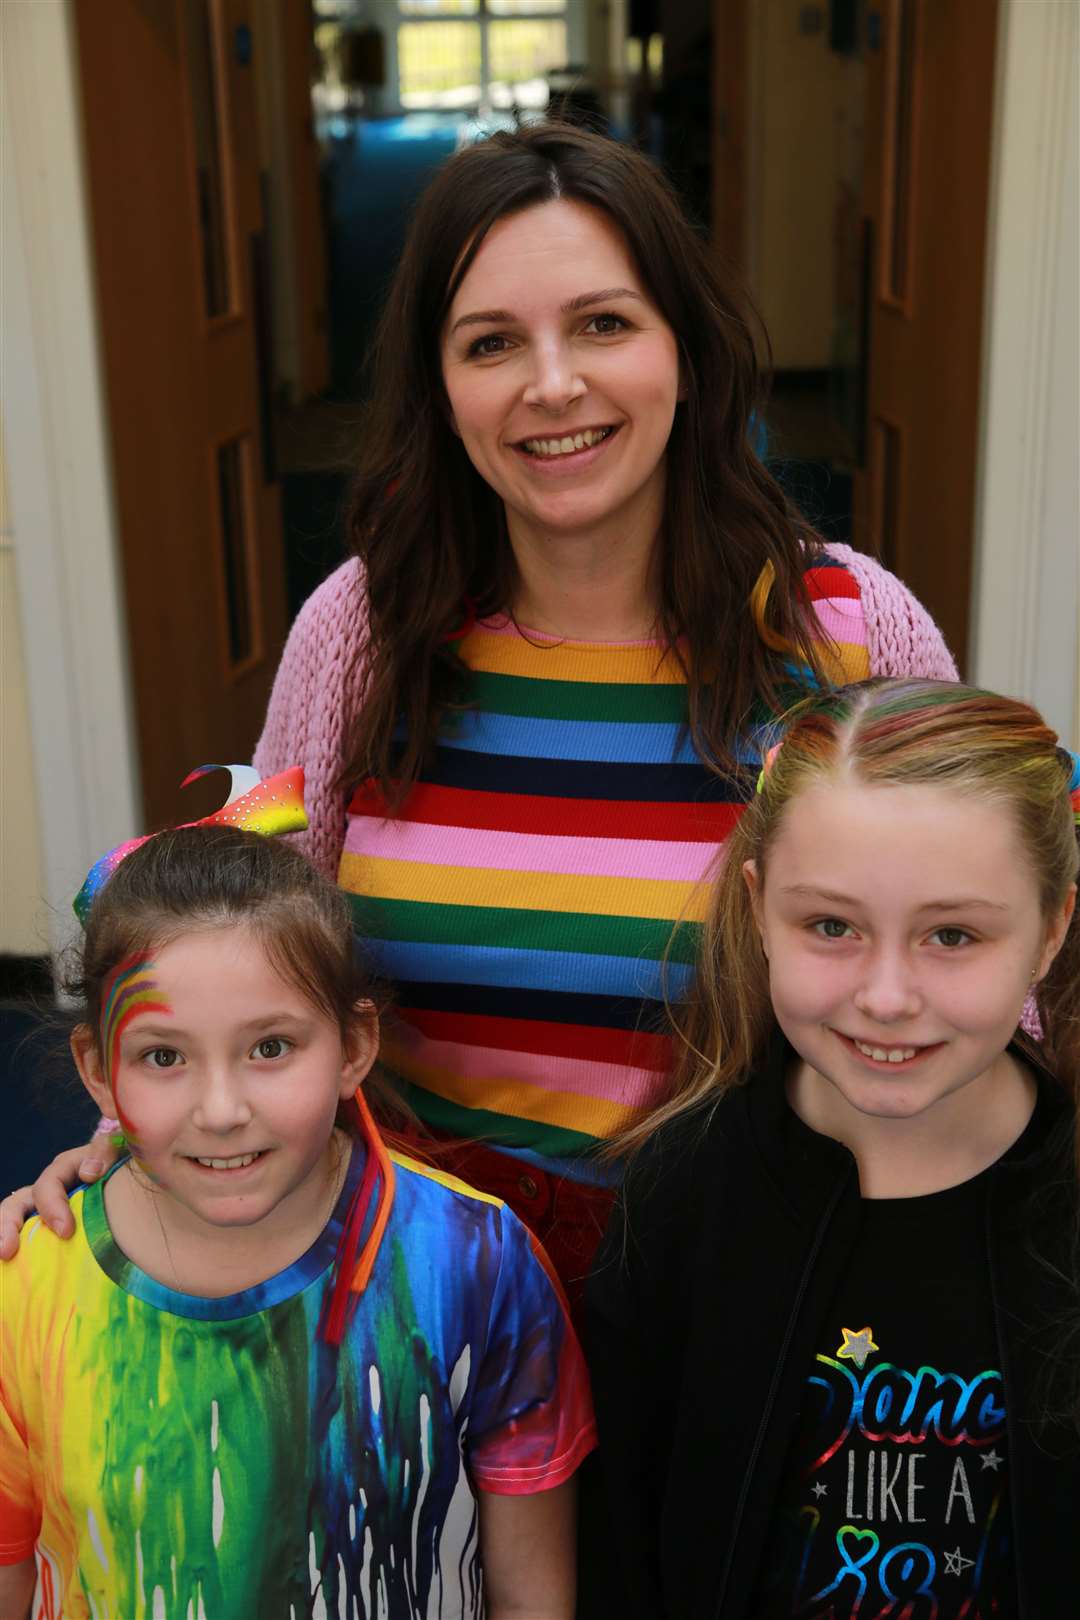 The momentos were given to pupils on Rainbow Day, when everyone dressed in colourful clothes